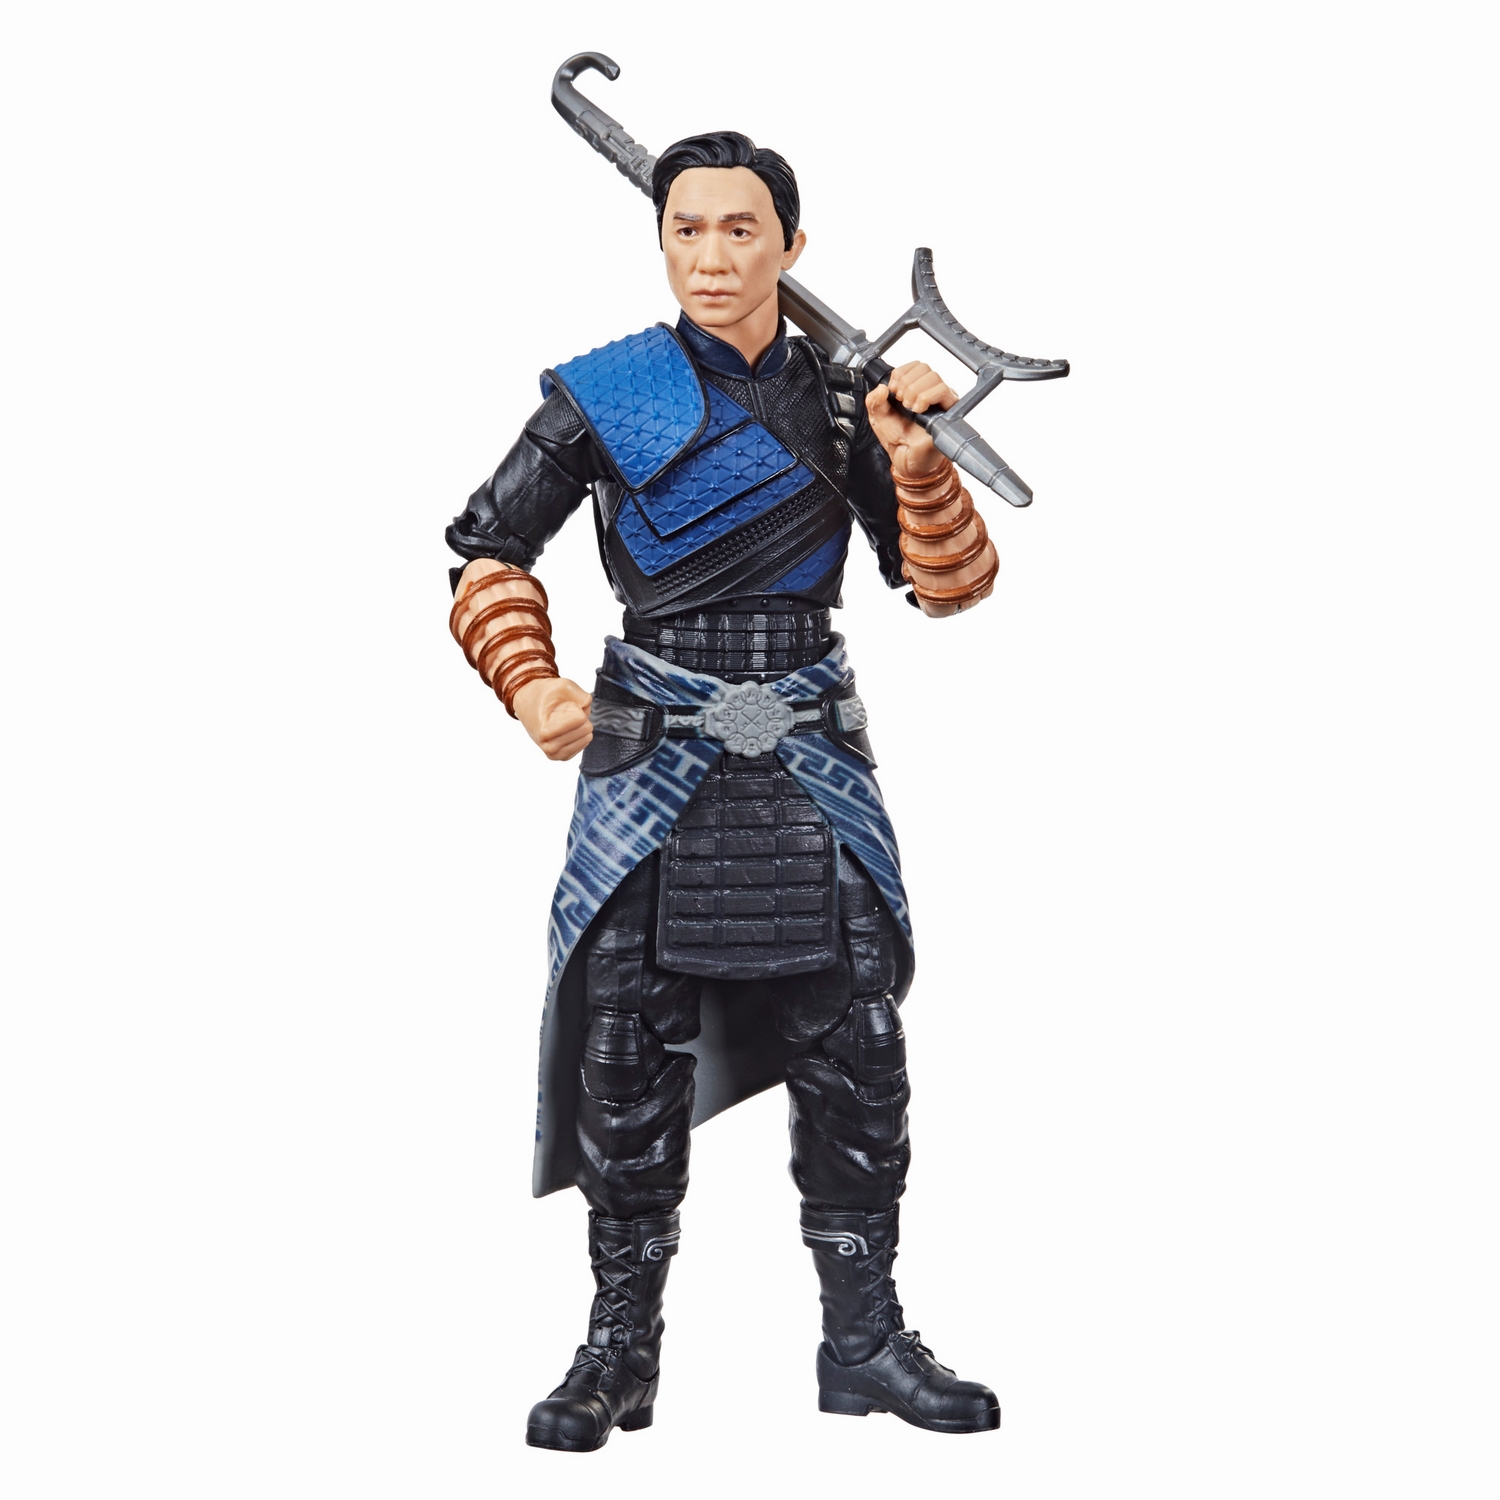 MARVEL LEGENDS SERIES 6-INCH SHANG-CHI AND THE LEGEND OF THE TEN RINGS - Wenwu oop6.jpg